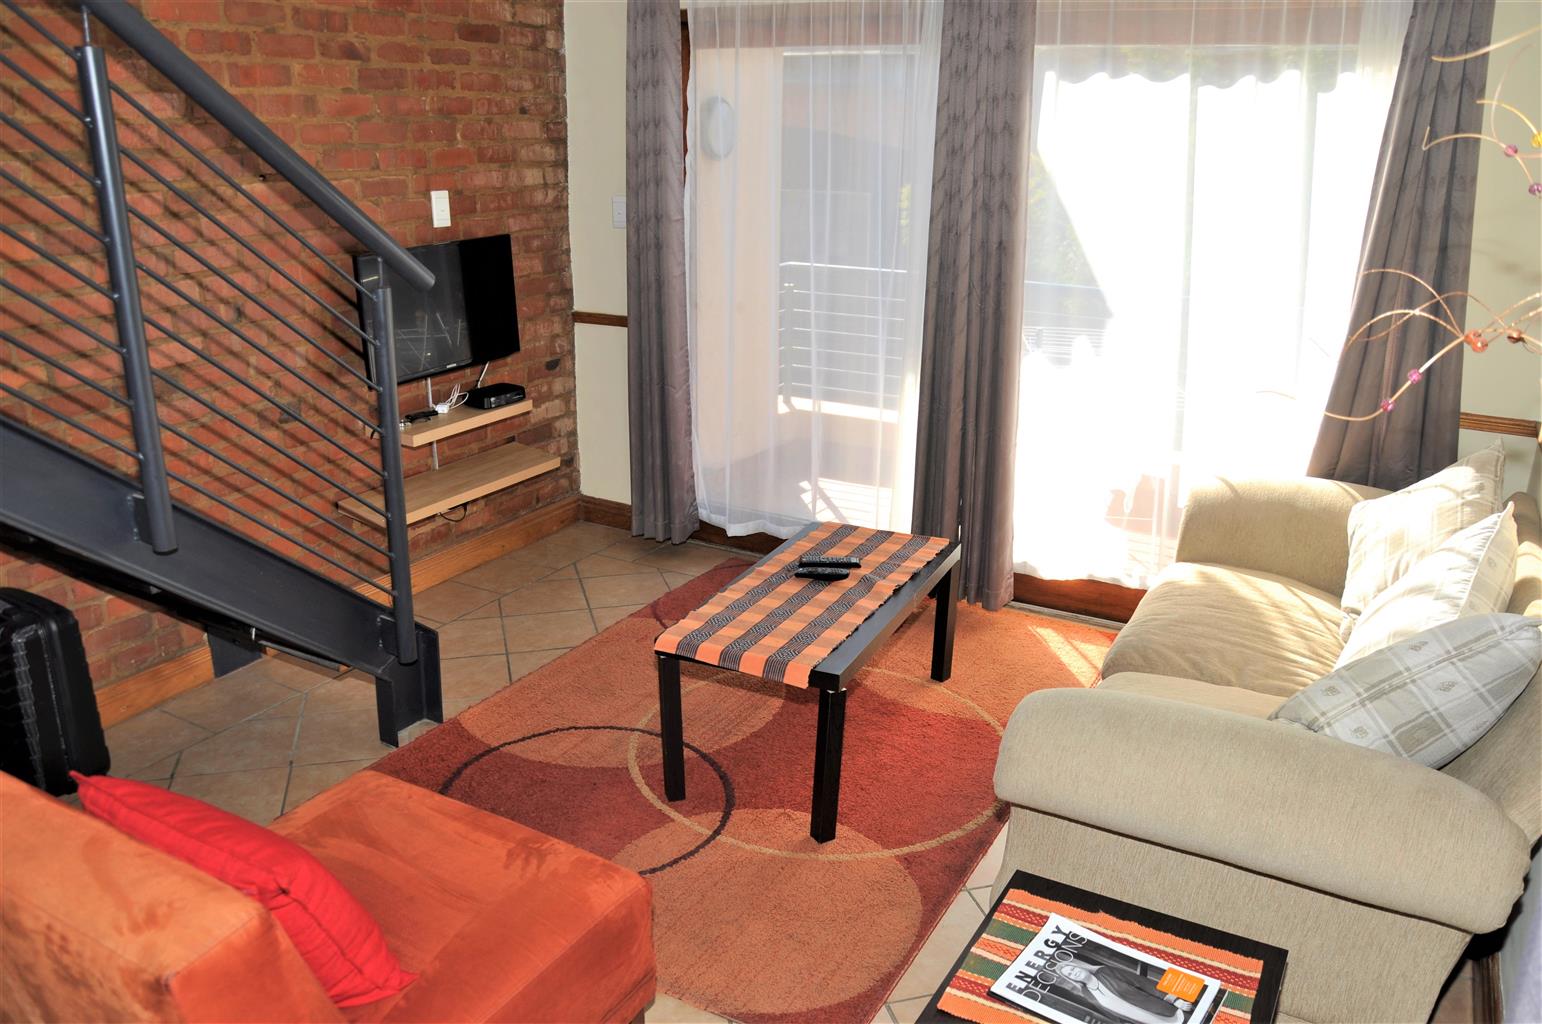 Fully Furnished Bachelor Loft 1 Bedroom Apartment To Let In Carlswald Midrand Junk Mail